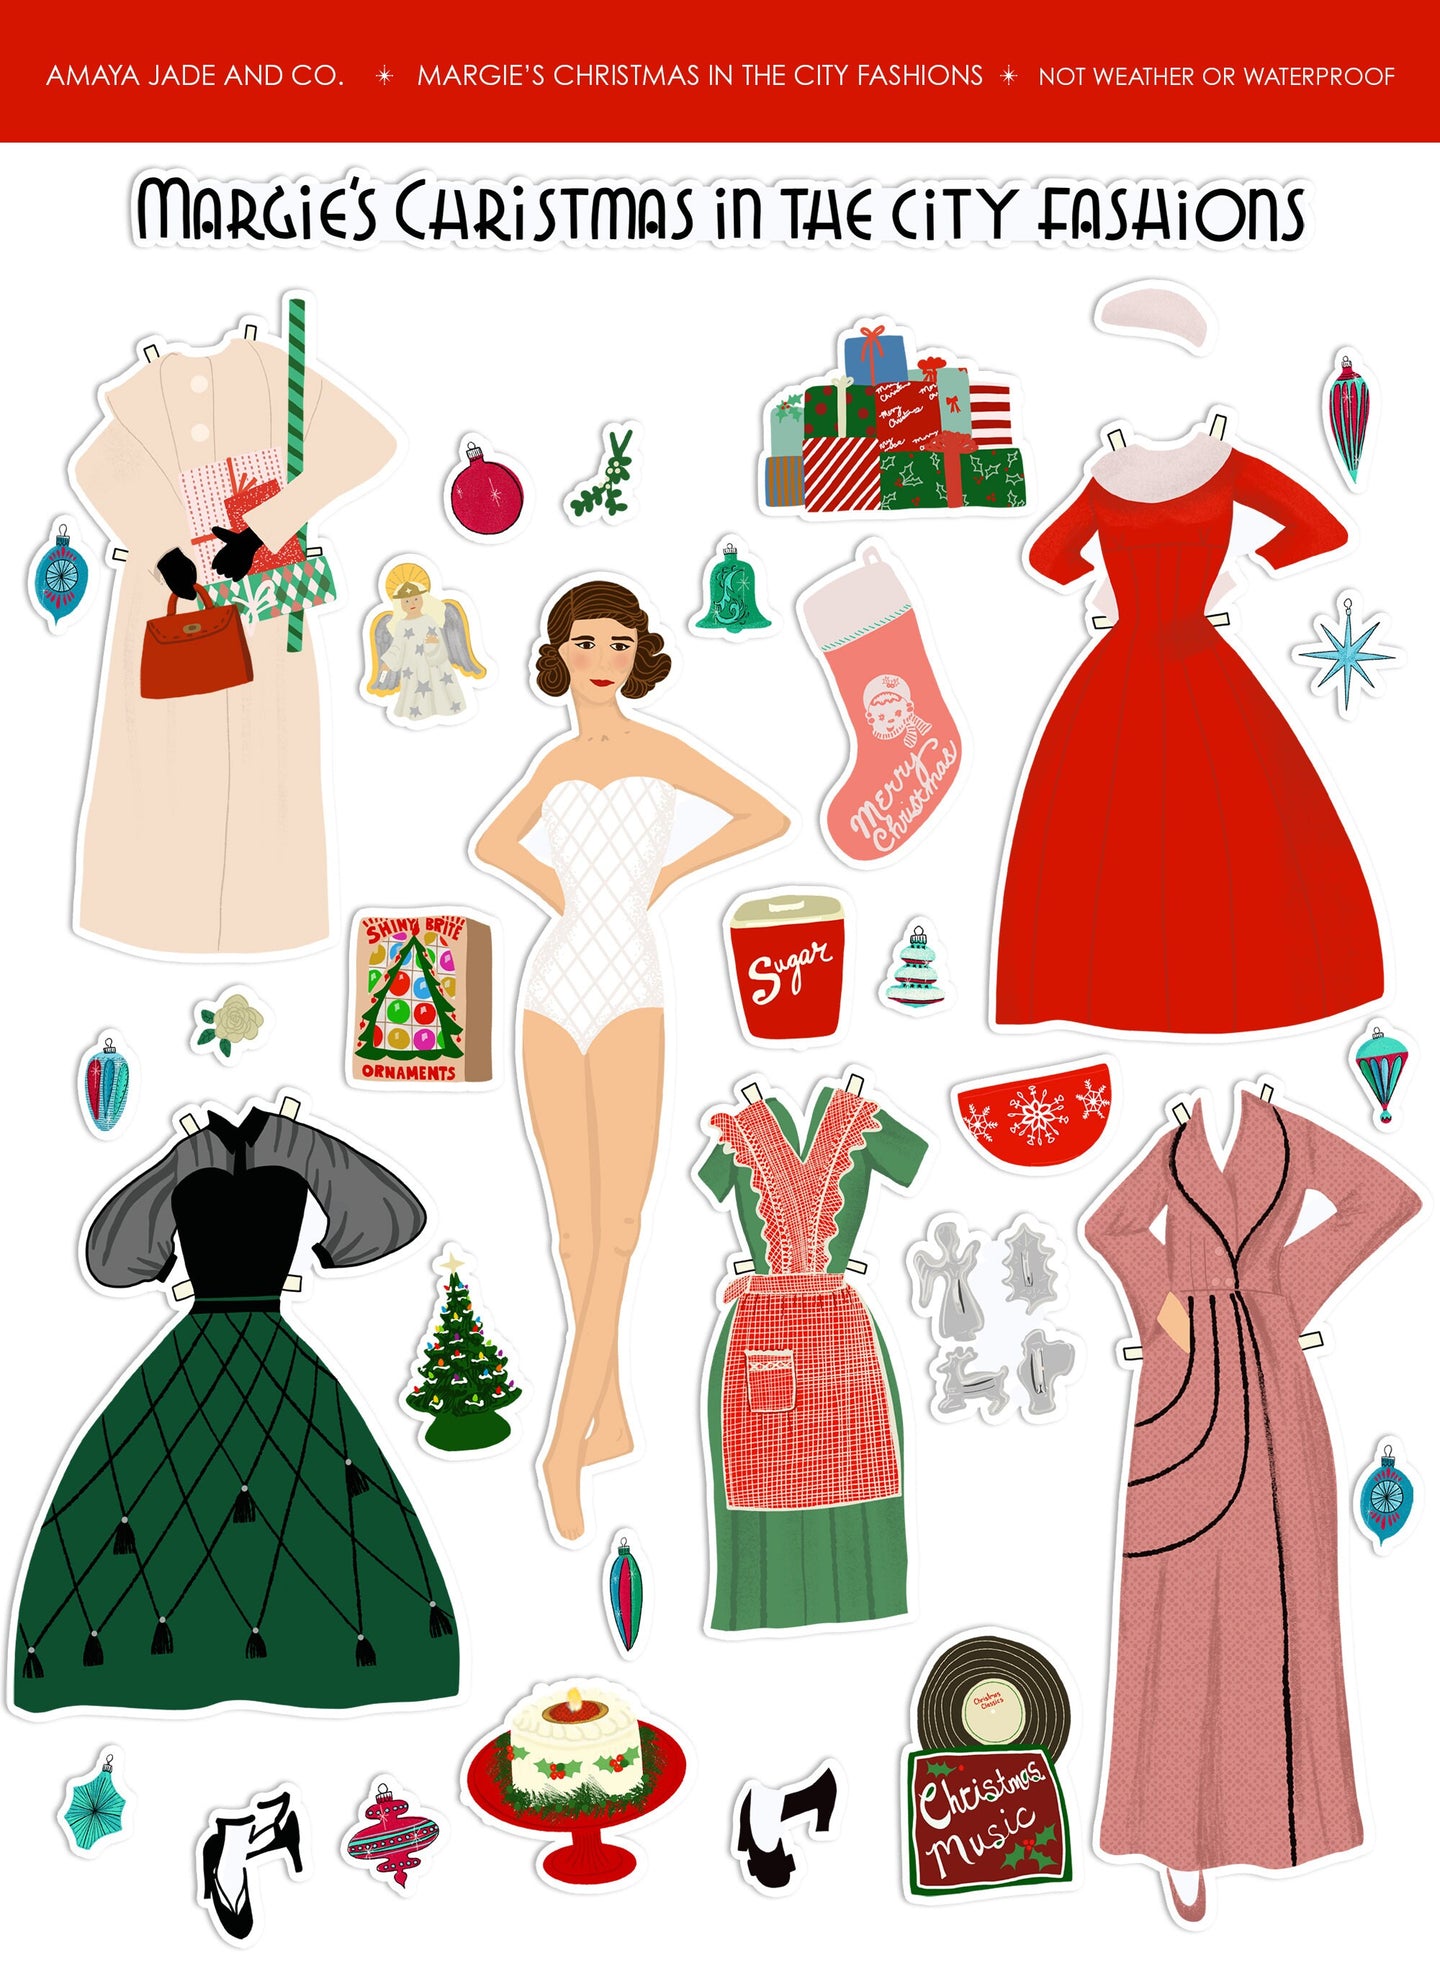 Margie's Christmas in the City Fashions Paper Doll Art Sticker Set